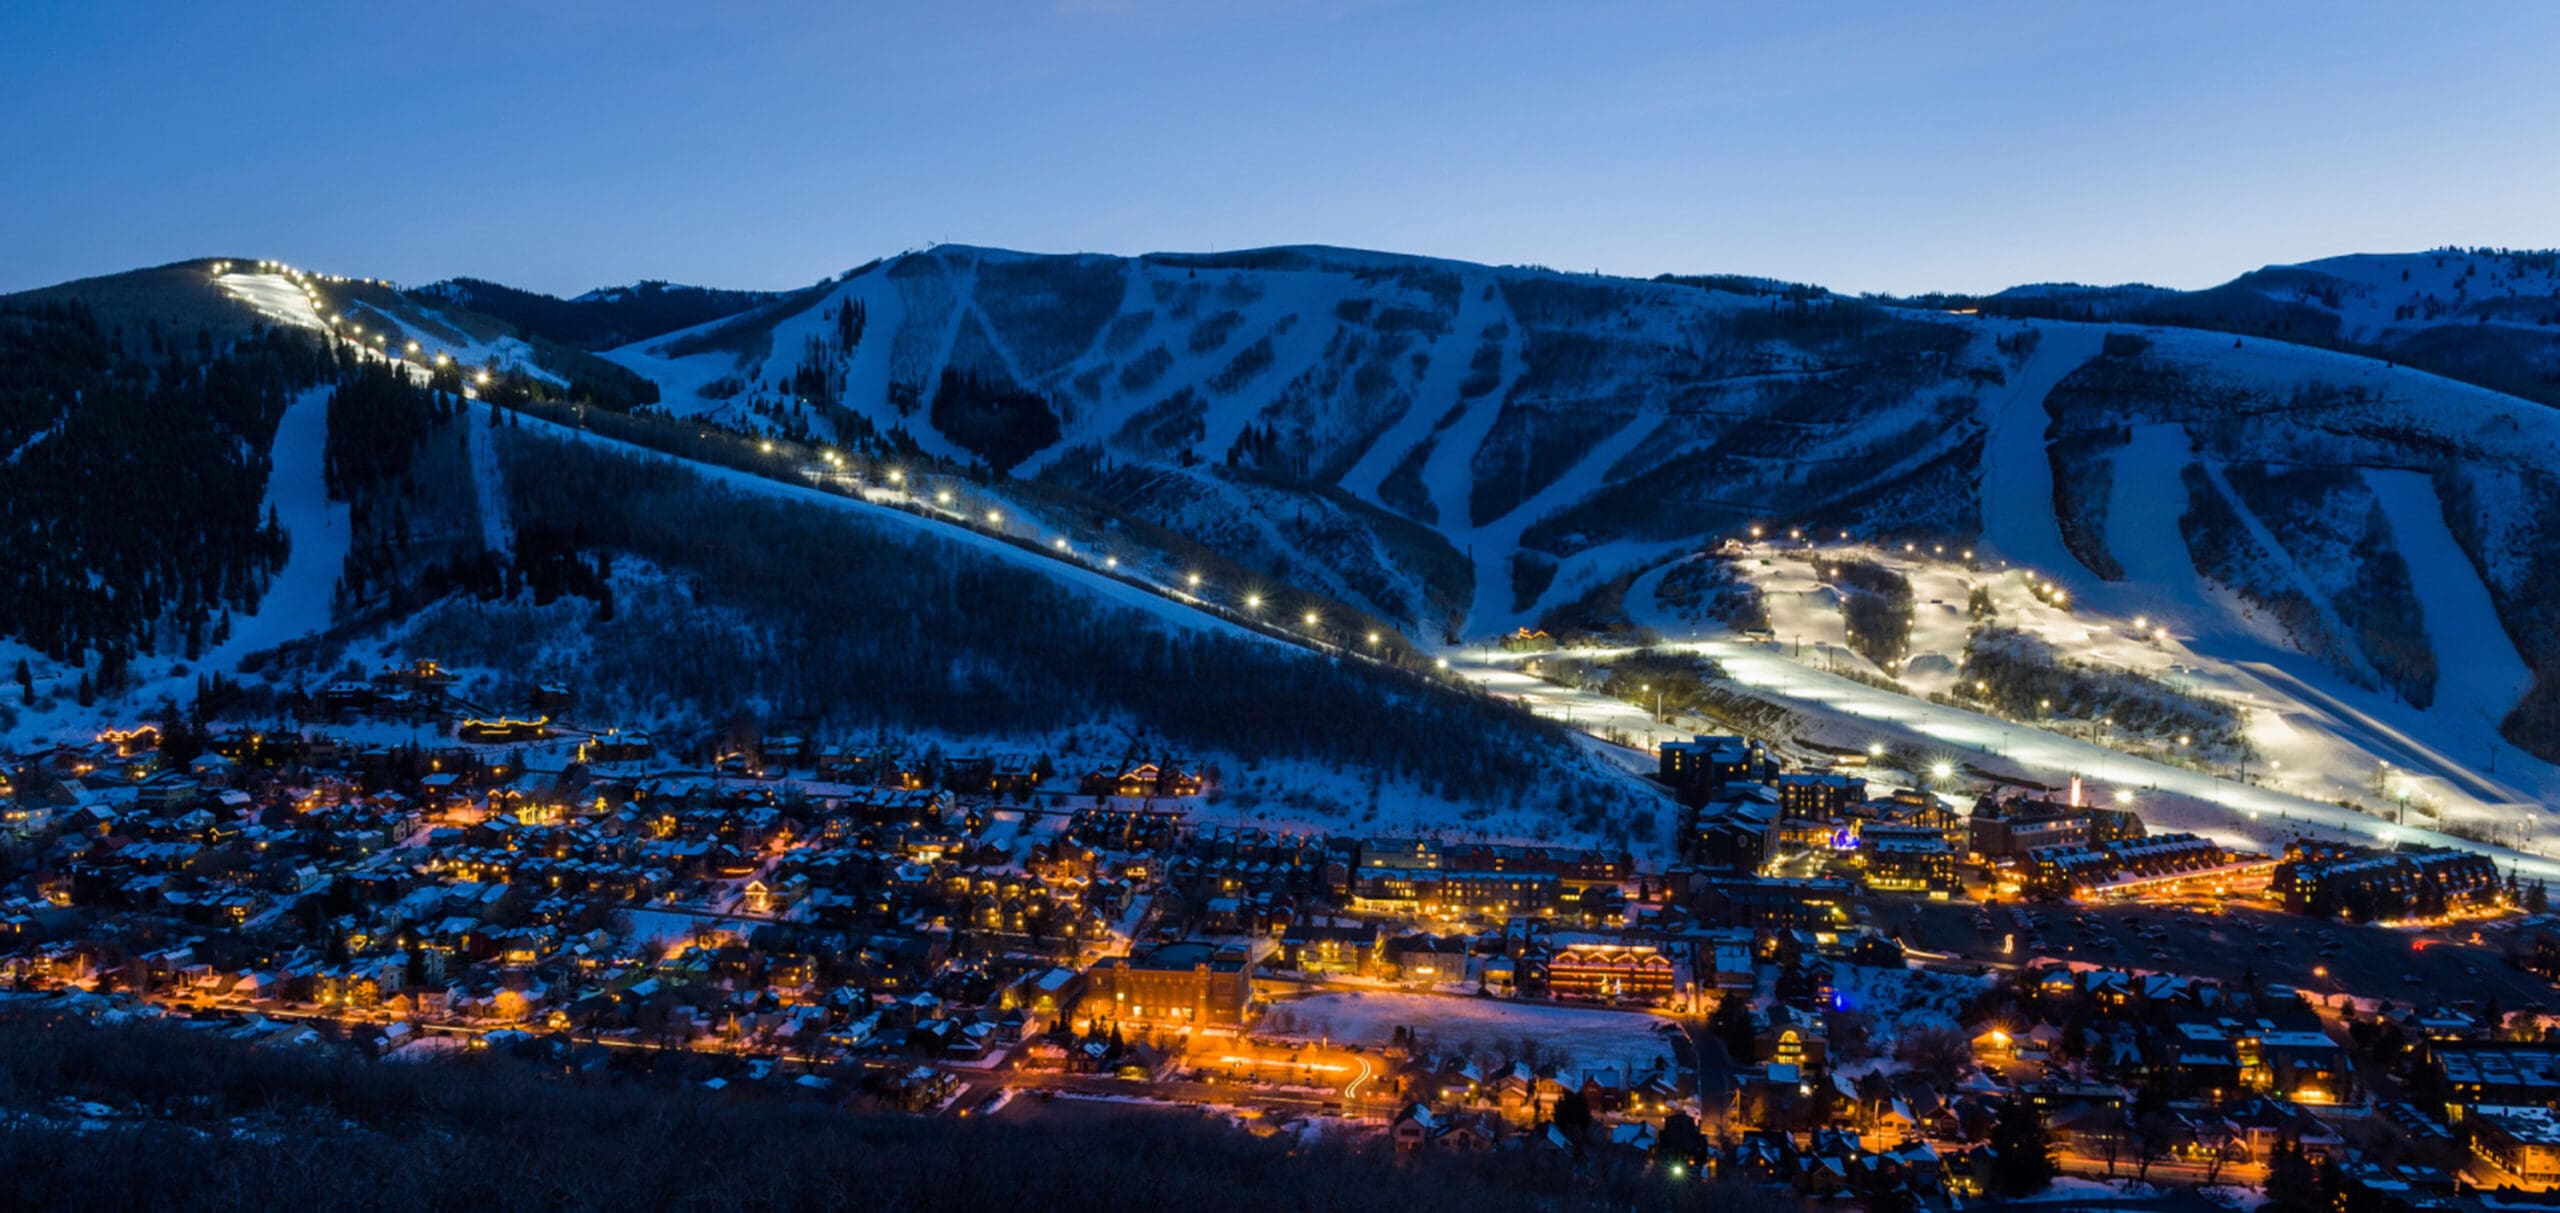 Reserve our Luxury Ski in Ski out Homes for Rent in Park City Utah